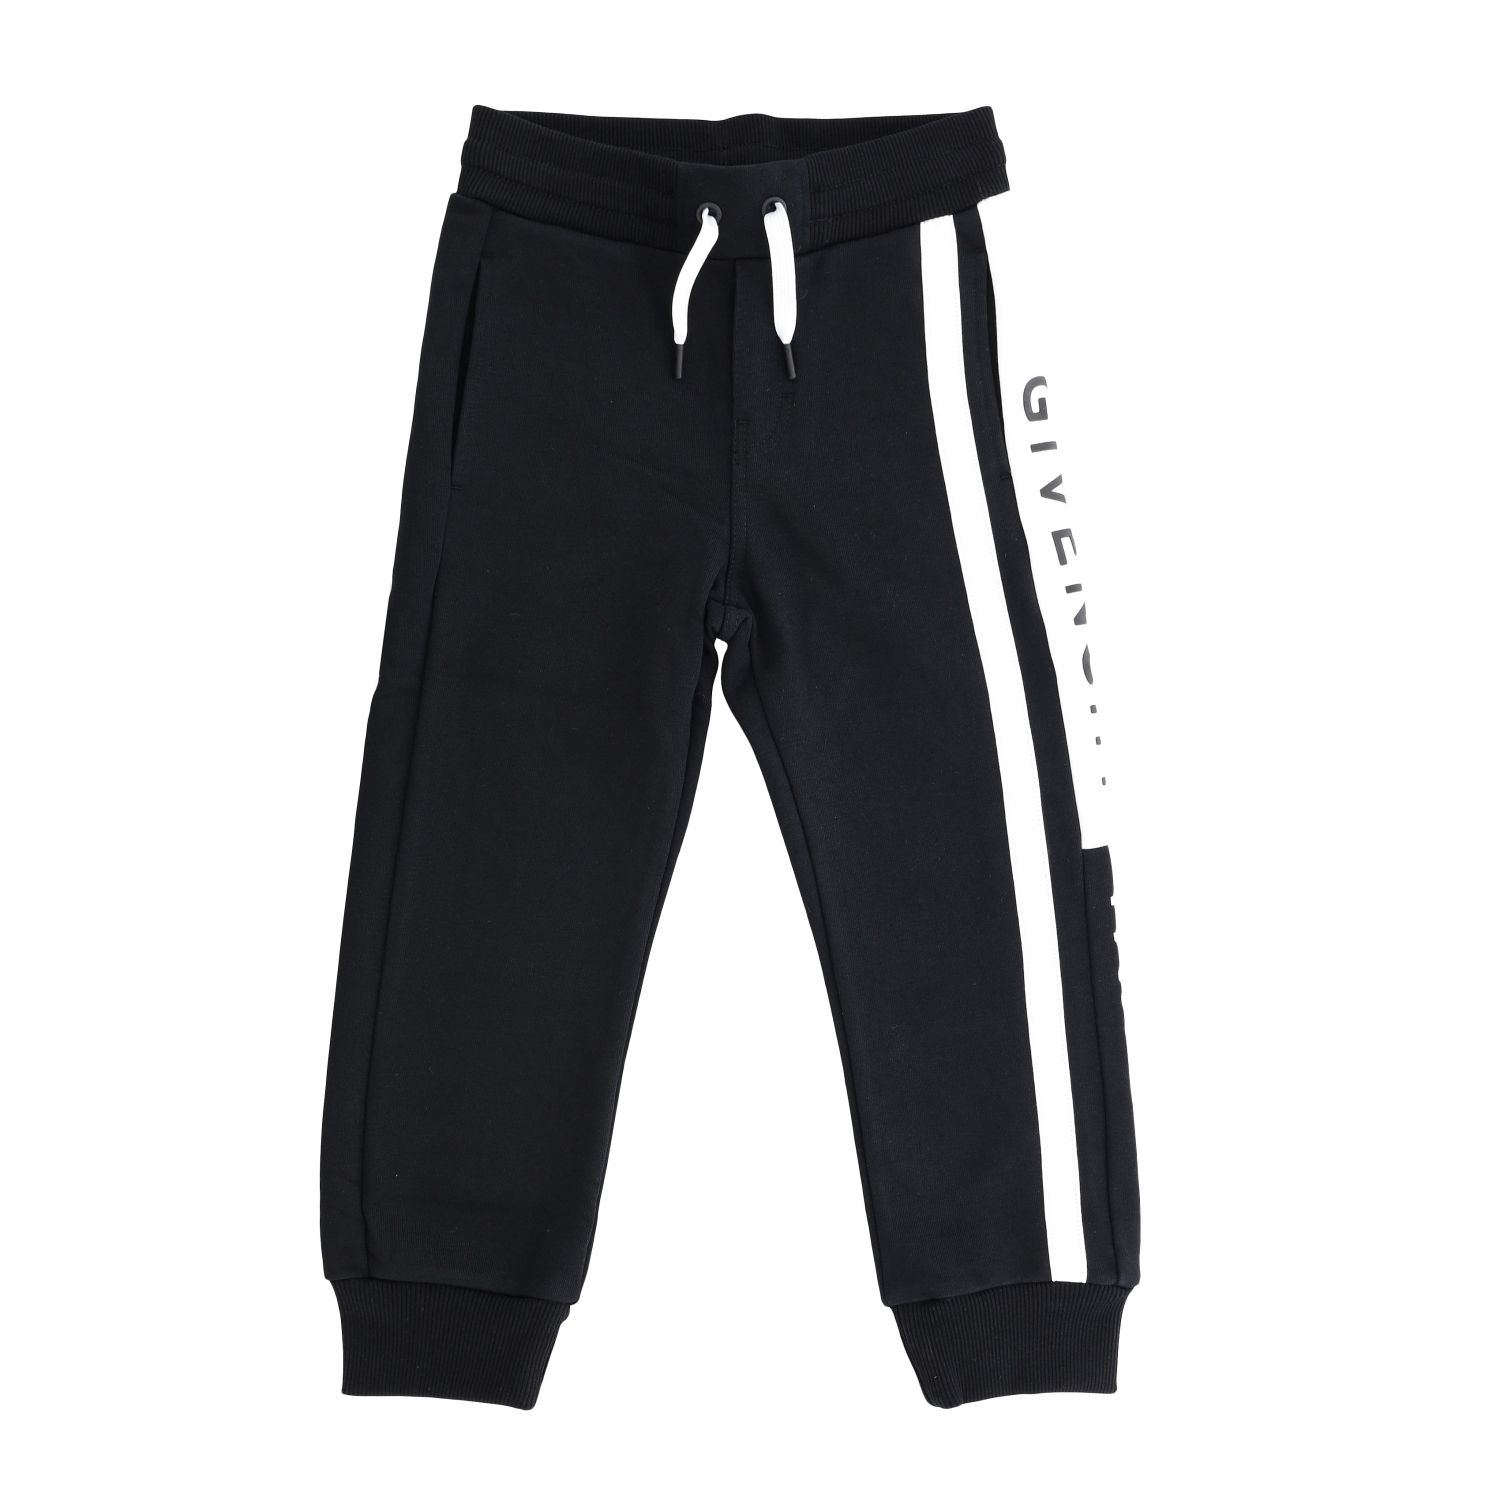 Givenchy jogging style trousers with bands and logo | Pants Givenchy ...